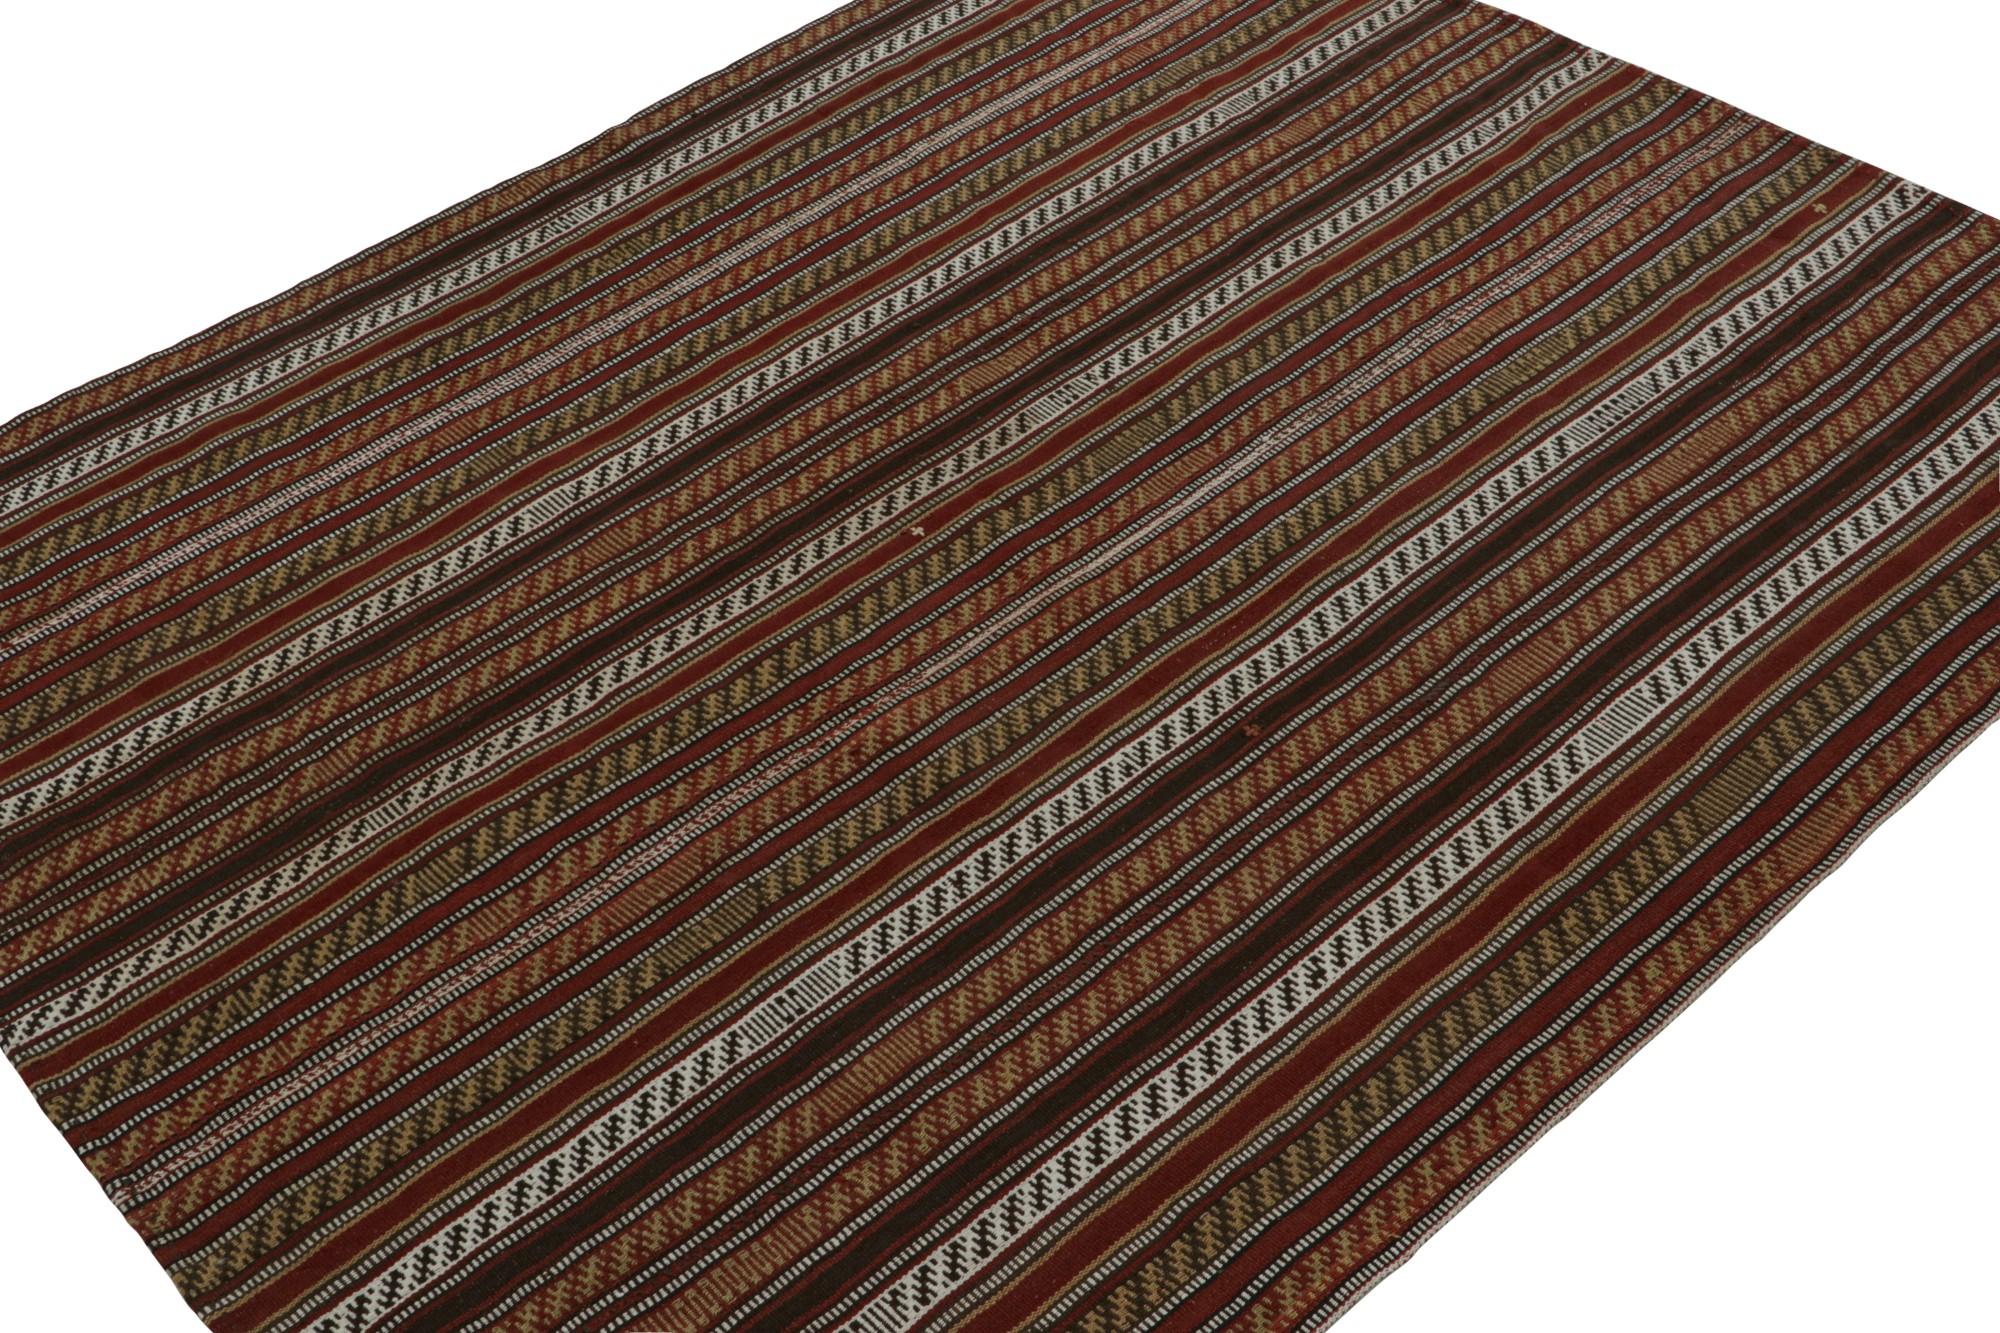 This vintage 5x6 tribal Kilim is a new addition to Rug & Kilim’s mid-century curations. Handwoven in wool, it originates from Afghanistan circa 1950-1960.

On the Design: 

This palas style flat weave boasts a union of tribal patterns and stripes in